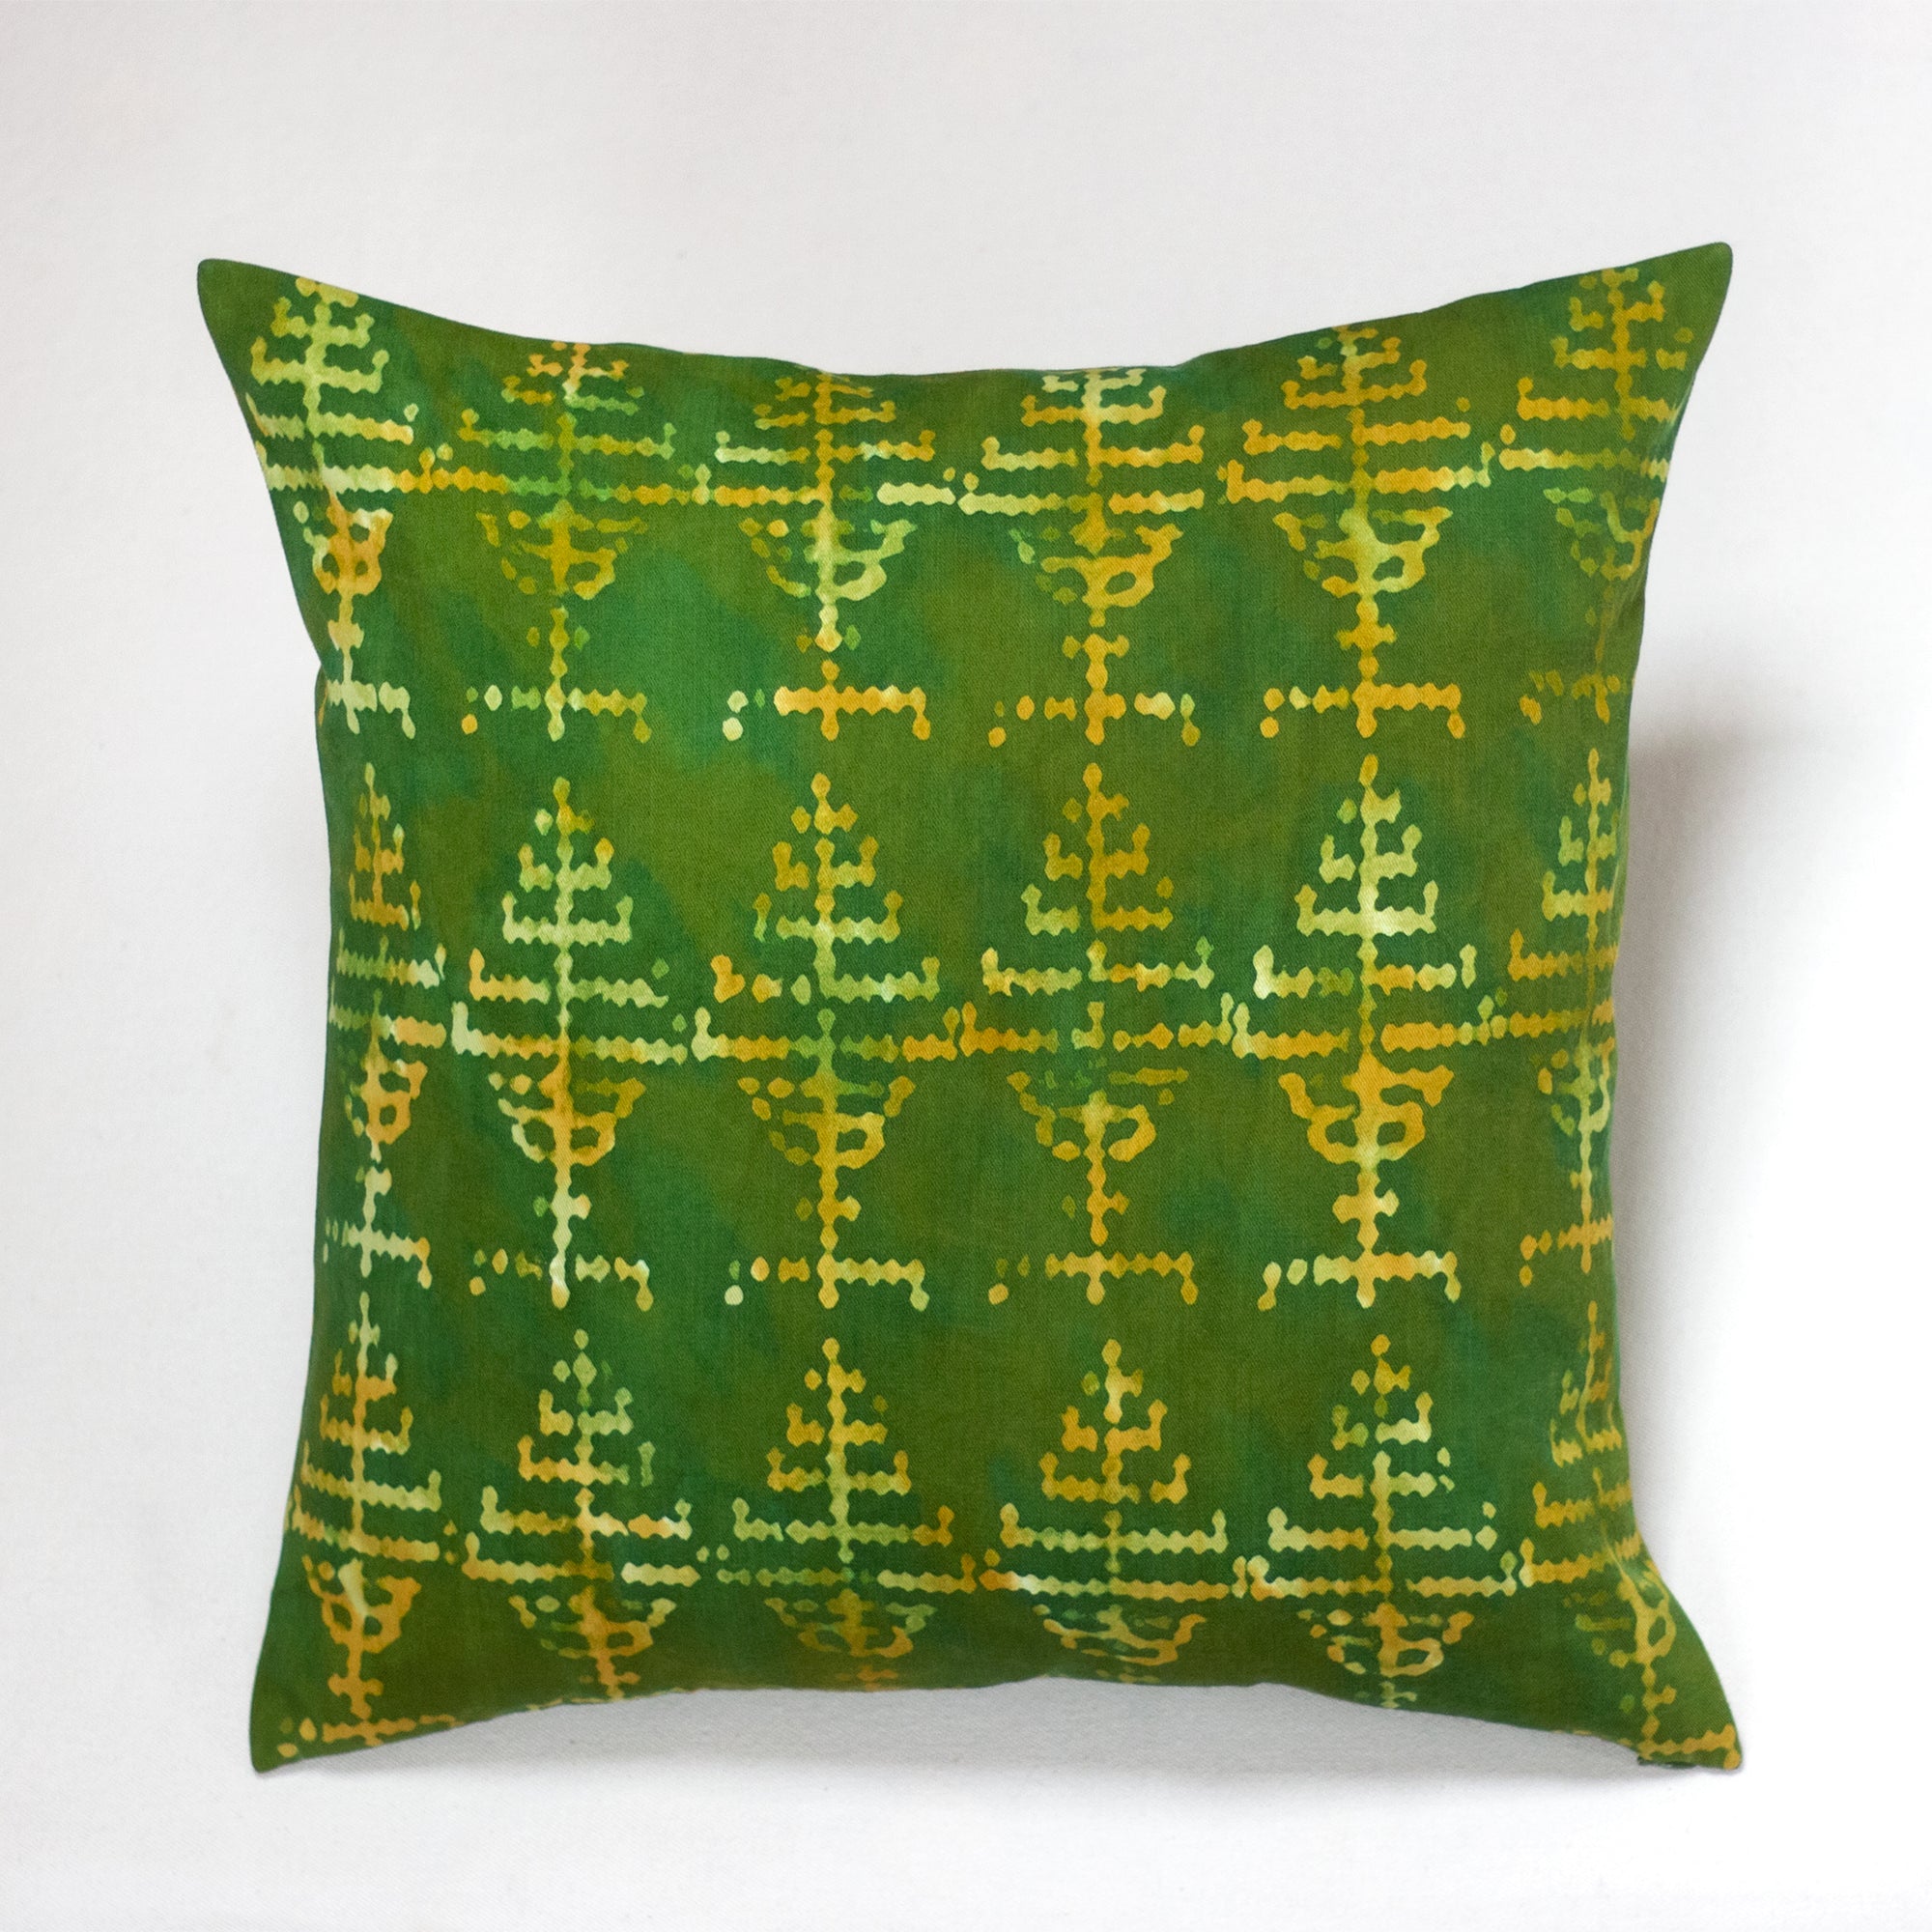 Hand Painted Accent Pillow Cover - Pines